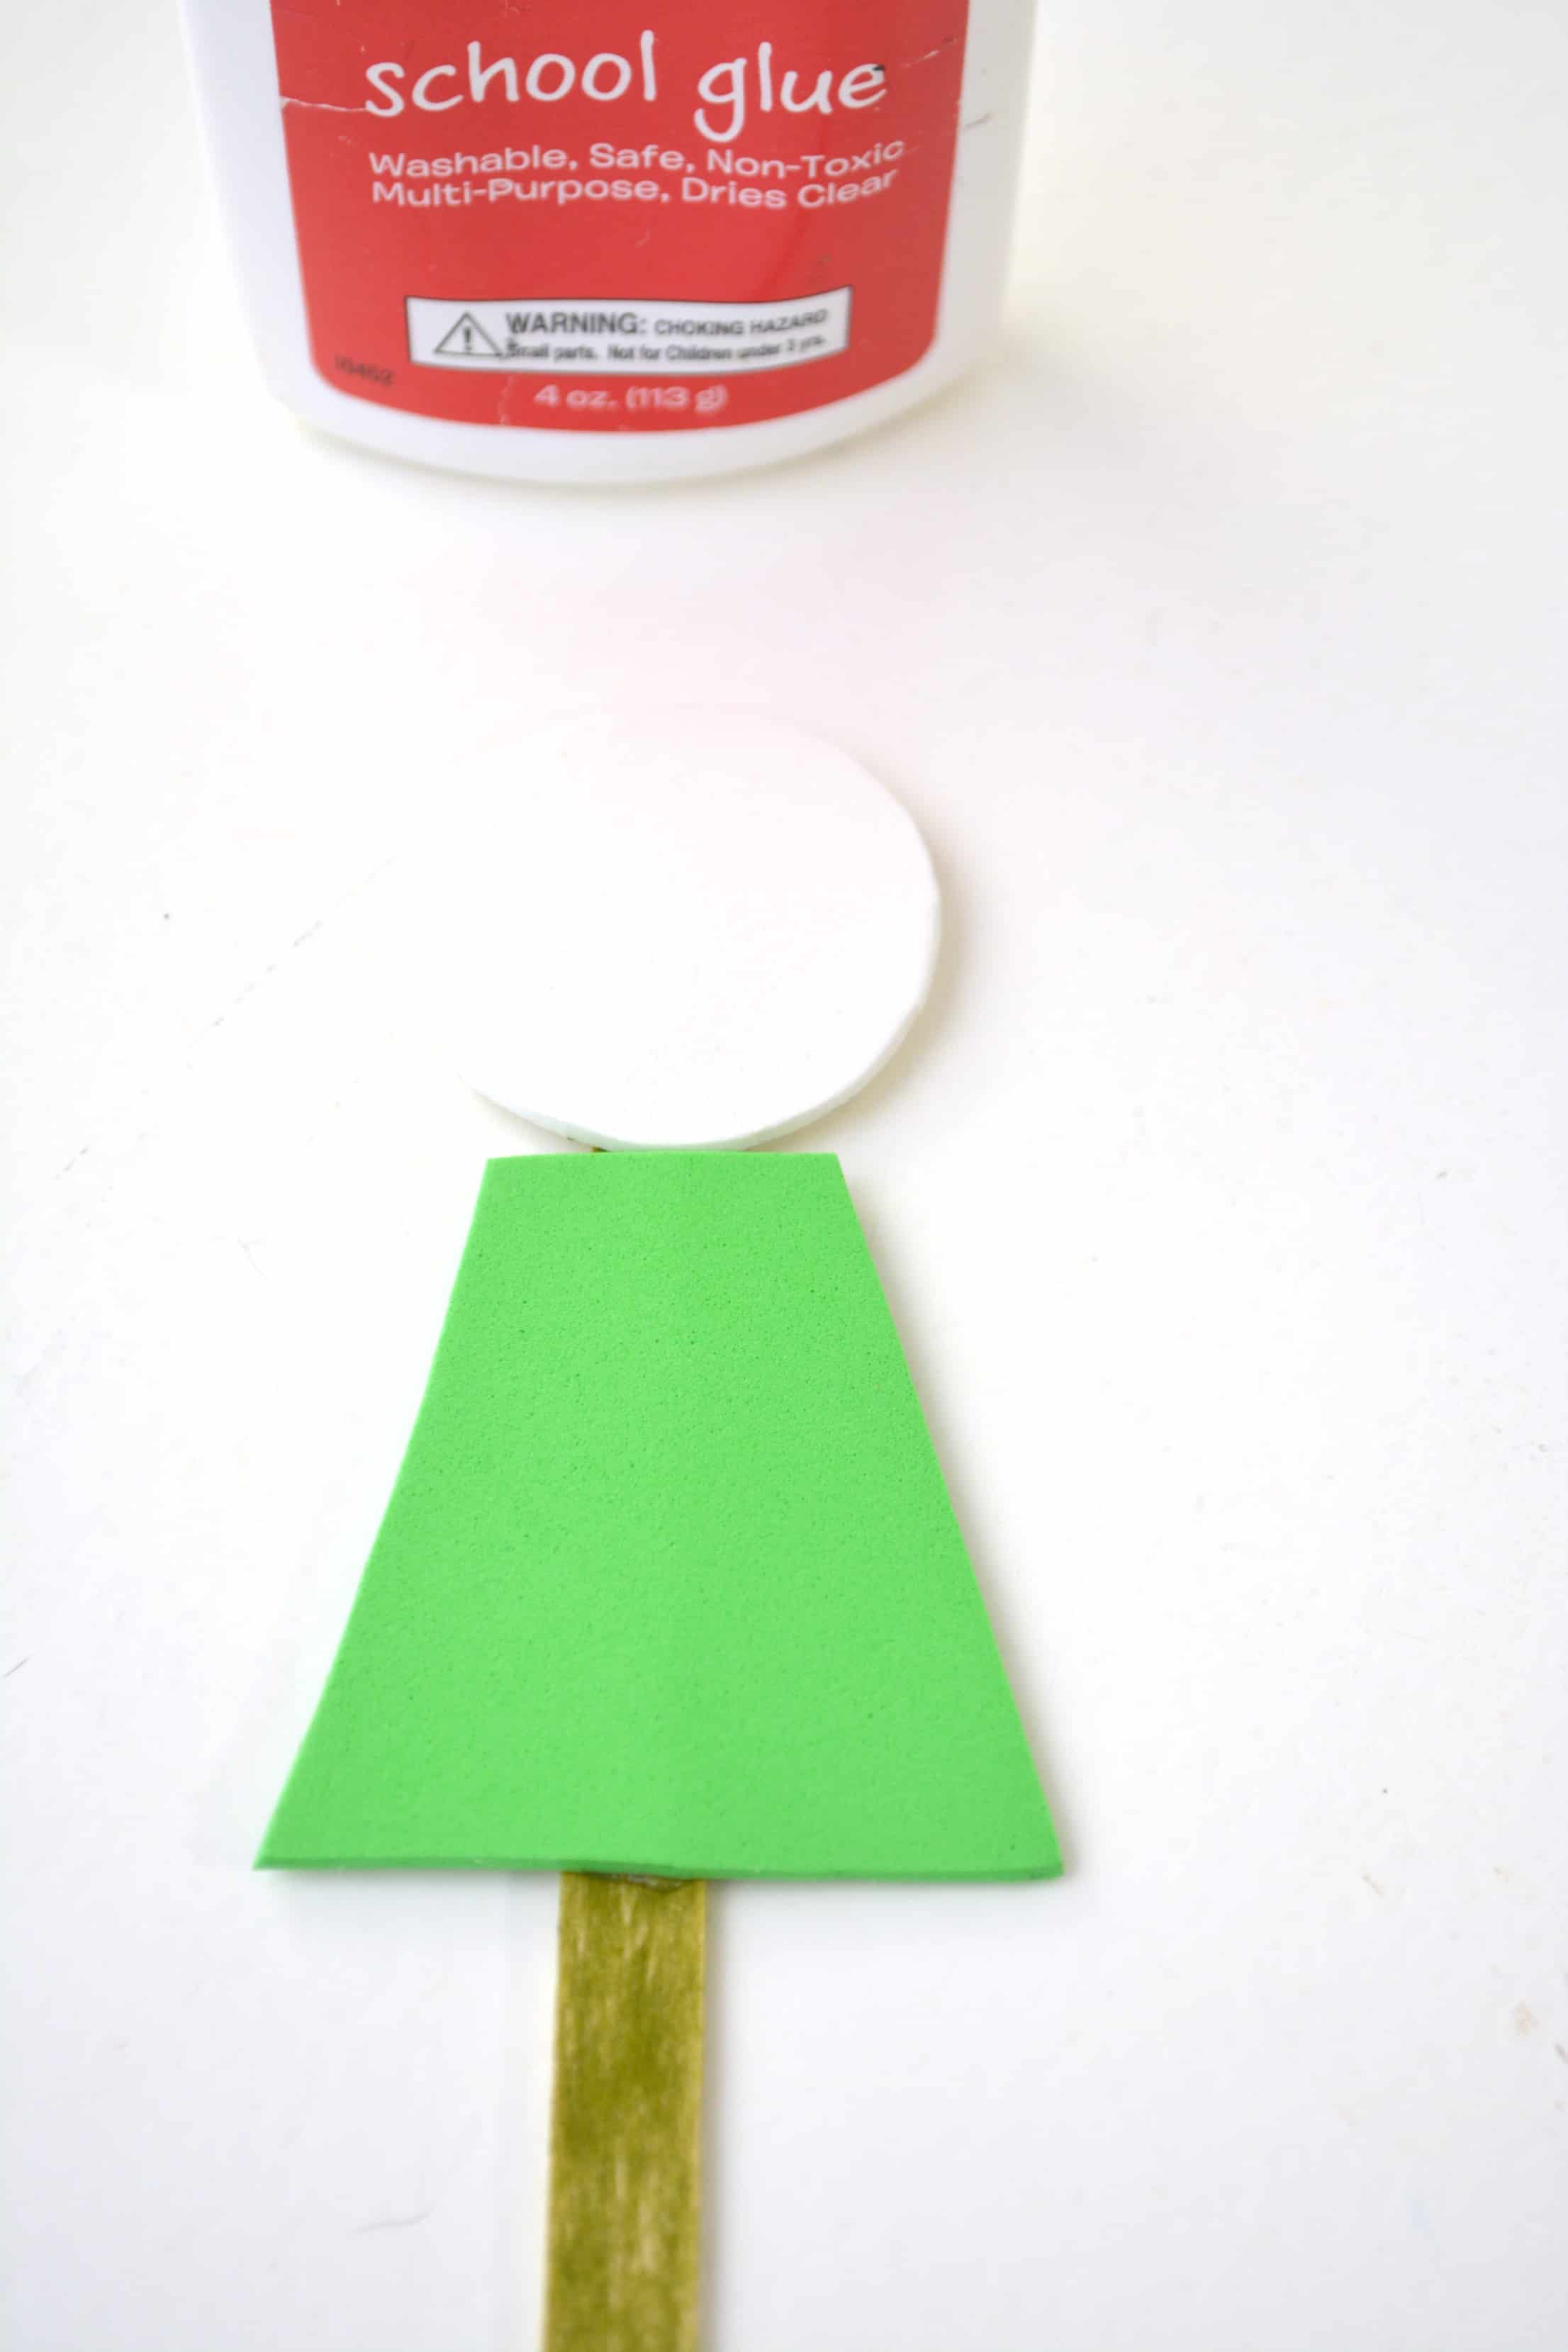 As St. Patrick's Day is in the corner, today I would like to share a very cute popsicle stick Leprechaun craft for you to have some fun with children welcoming St. Patrick's Day. This adorable craft is great to display around. You might also make some variation out of it.